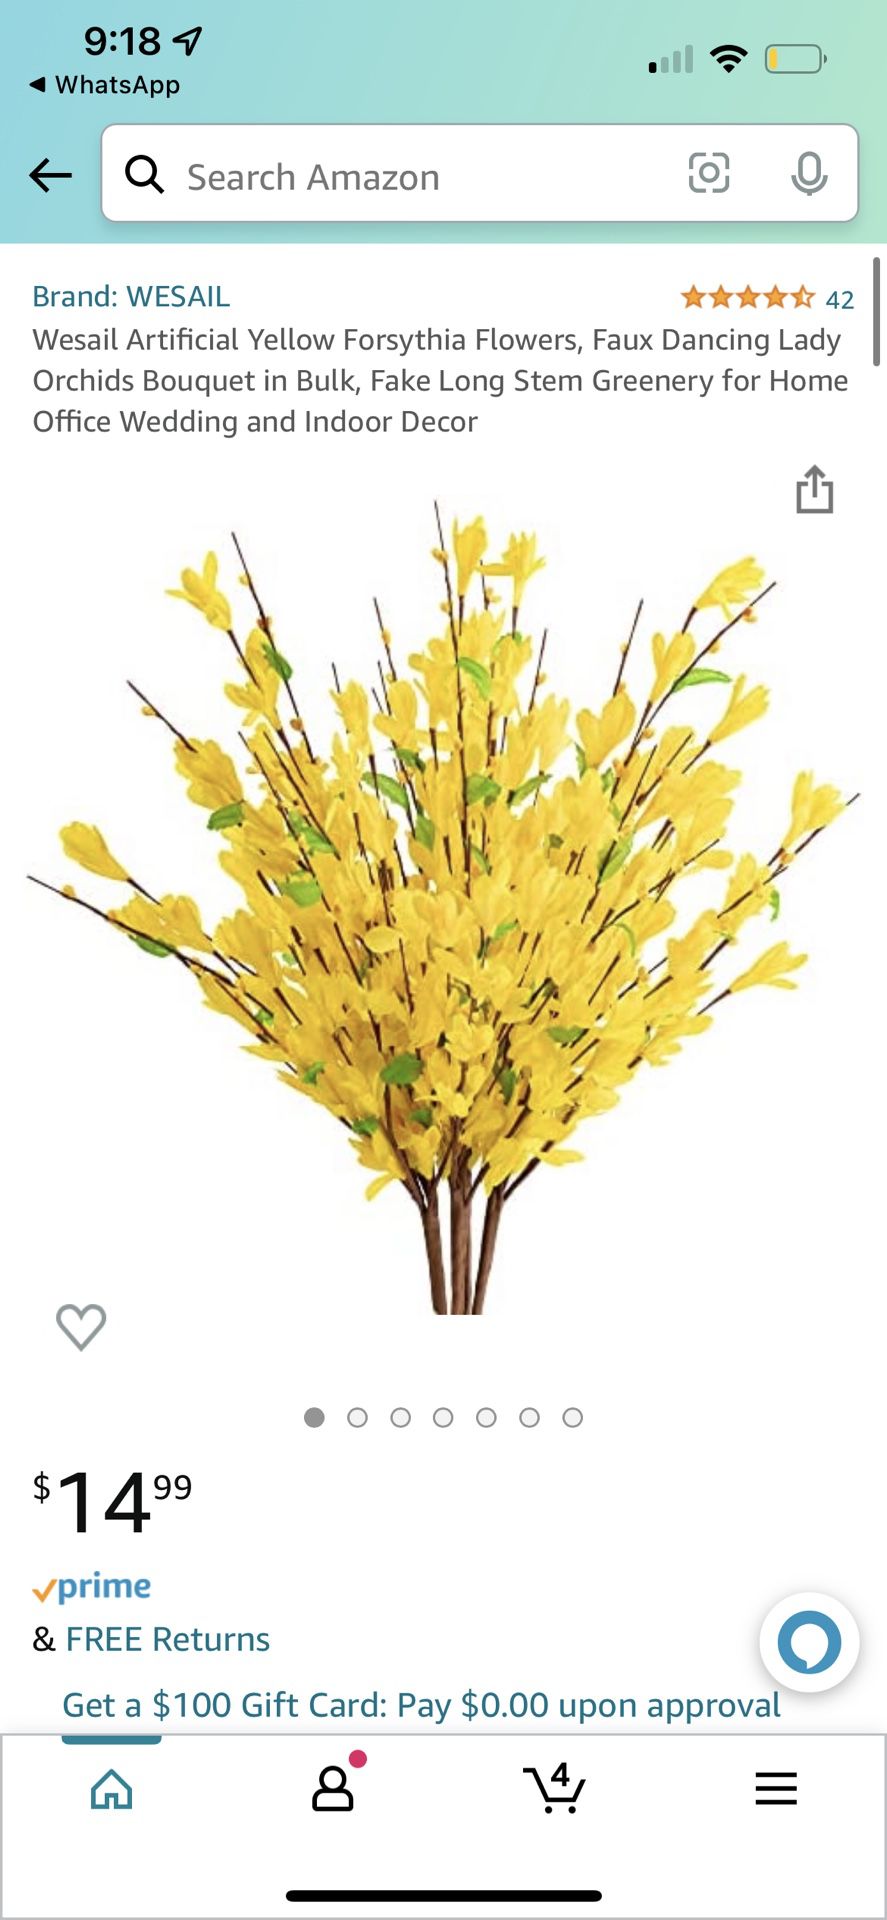 Artificial Yellow Forsythia Flowers, Faux Dancing Lady Orchids Bouquet in Bulk, Fake Long Stem Greenery for Home Office Wedding and Indoor Decor  Wesa